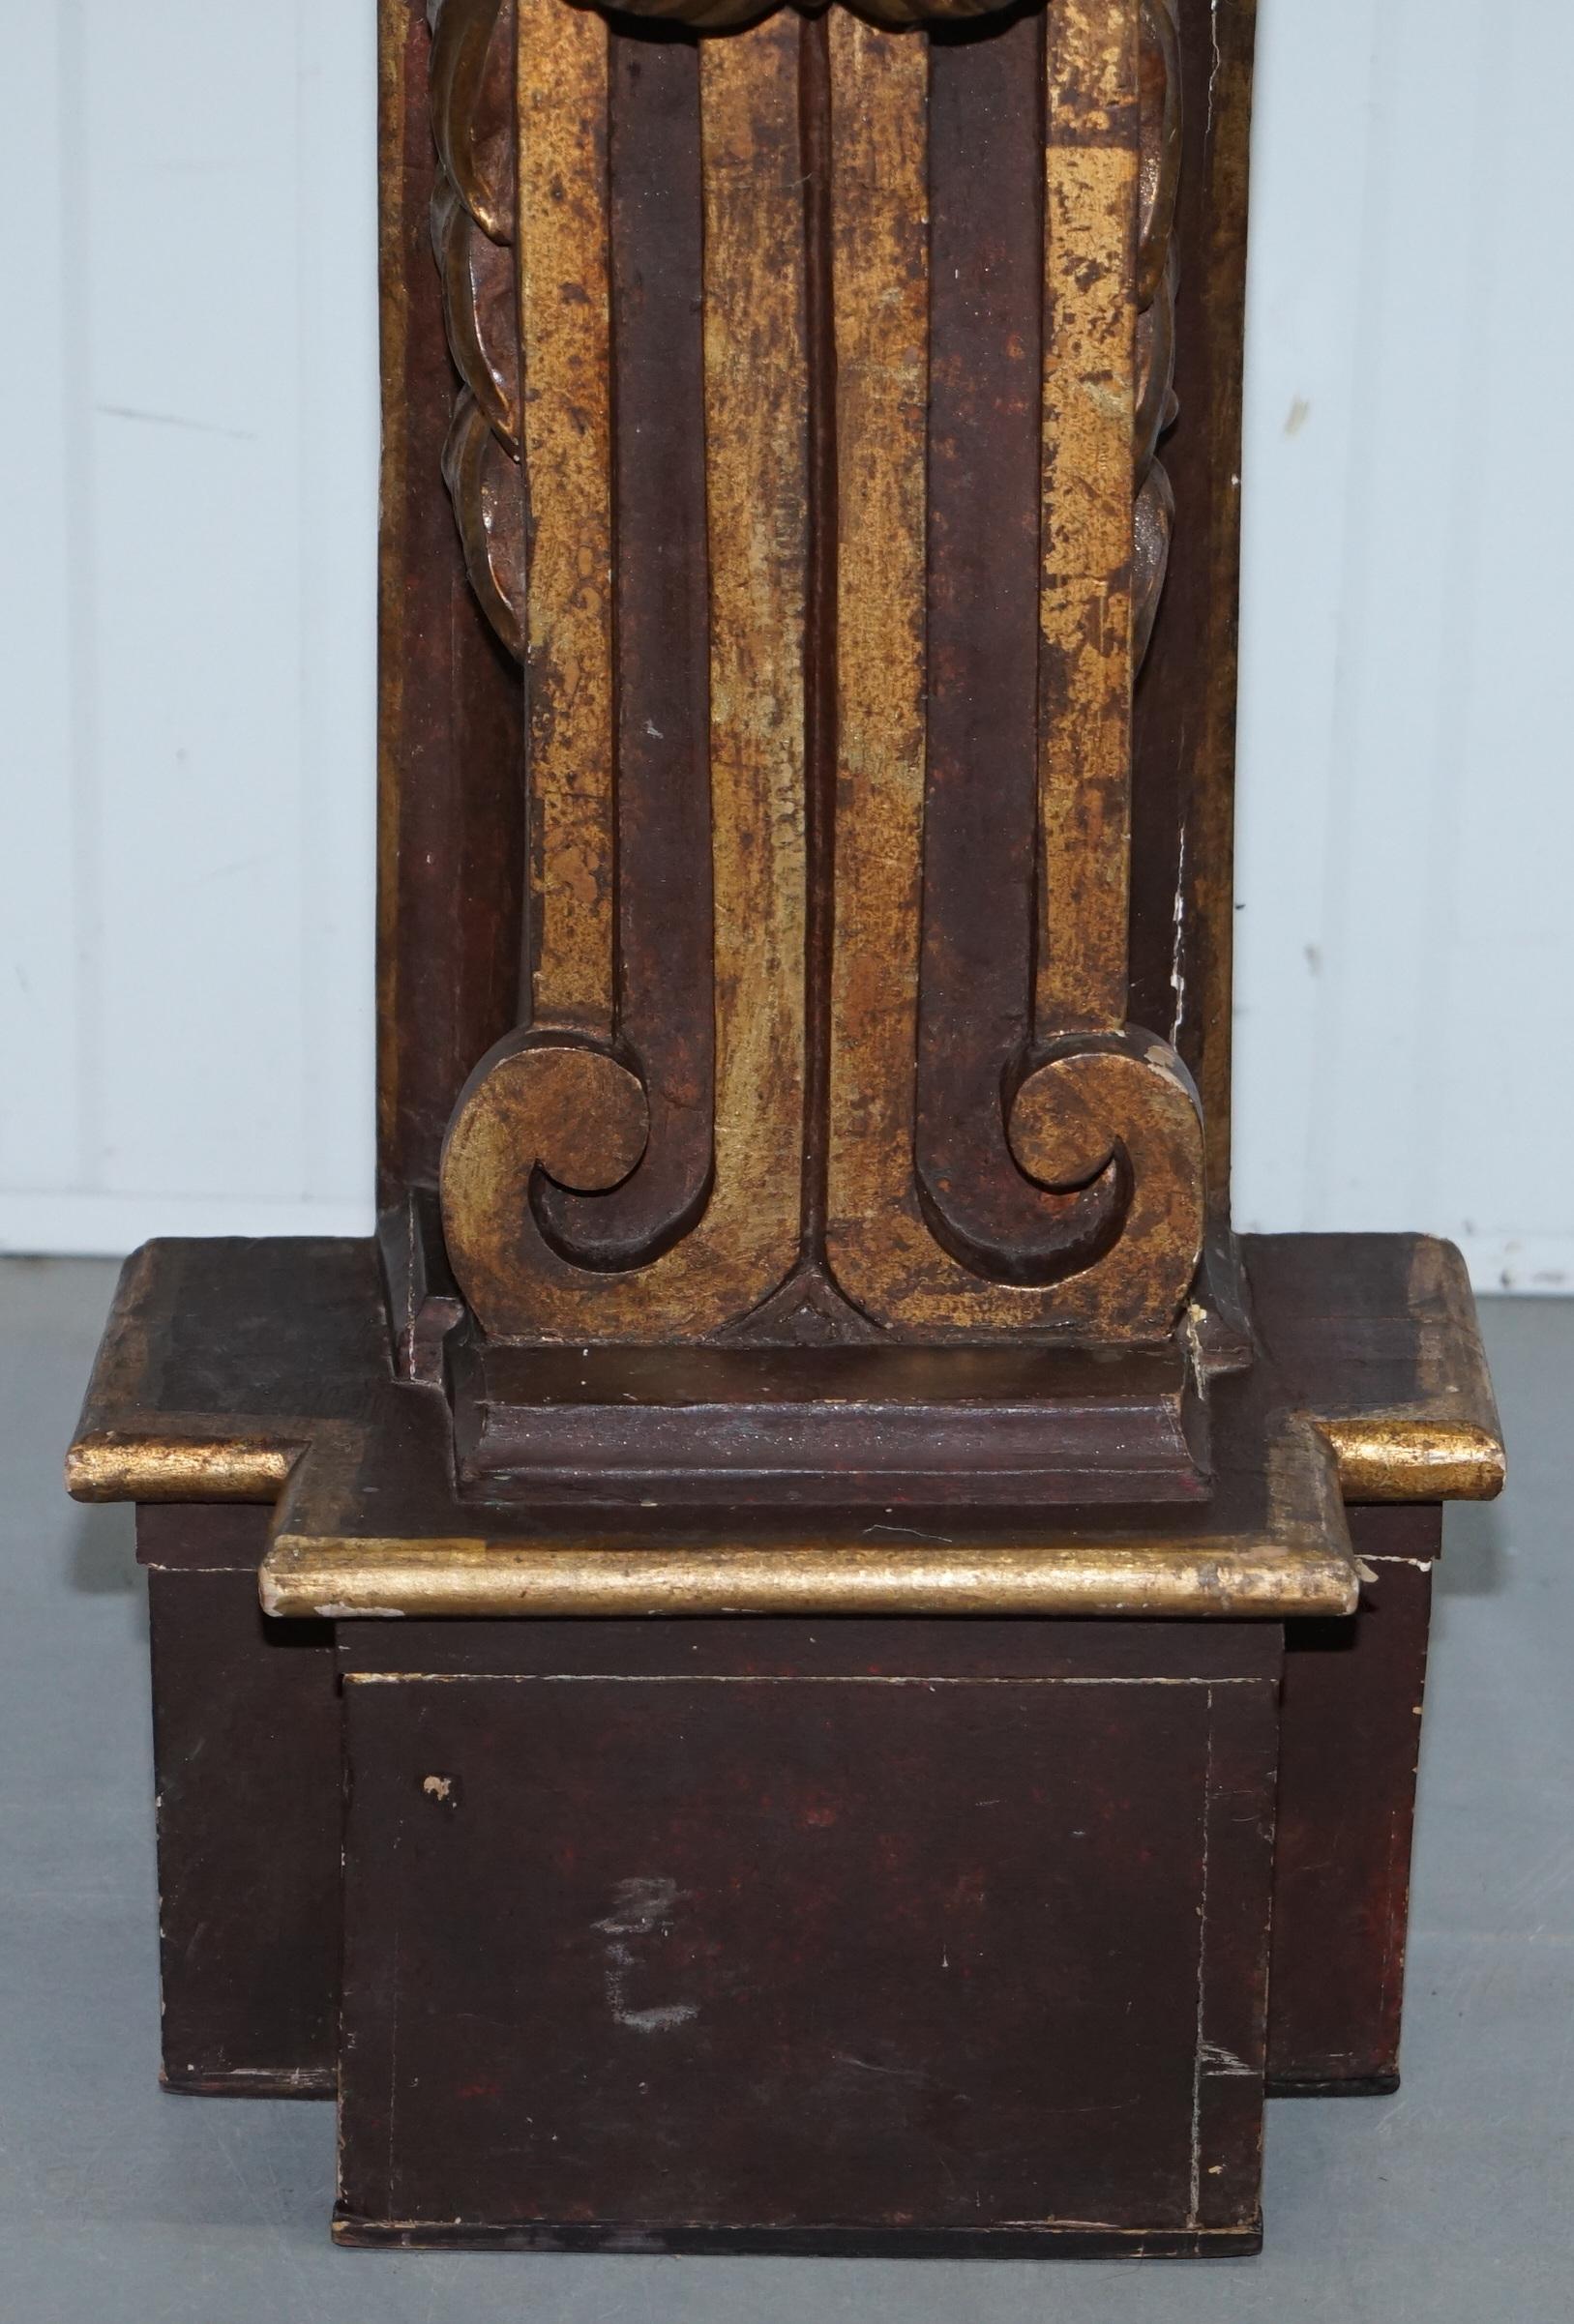 20th Century Pair of Old Ship Style Pillars Column Pedestals Jardinière Stands Carved Wood